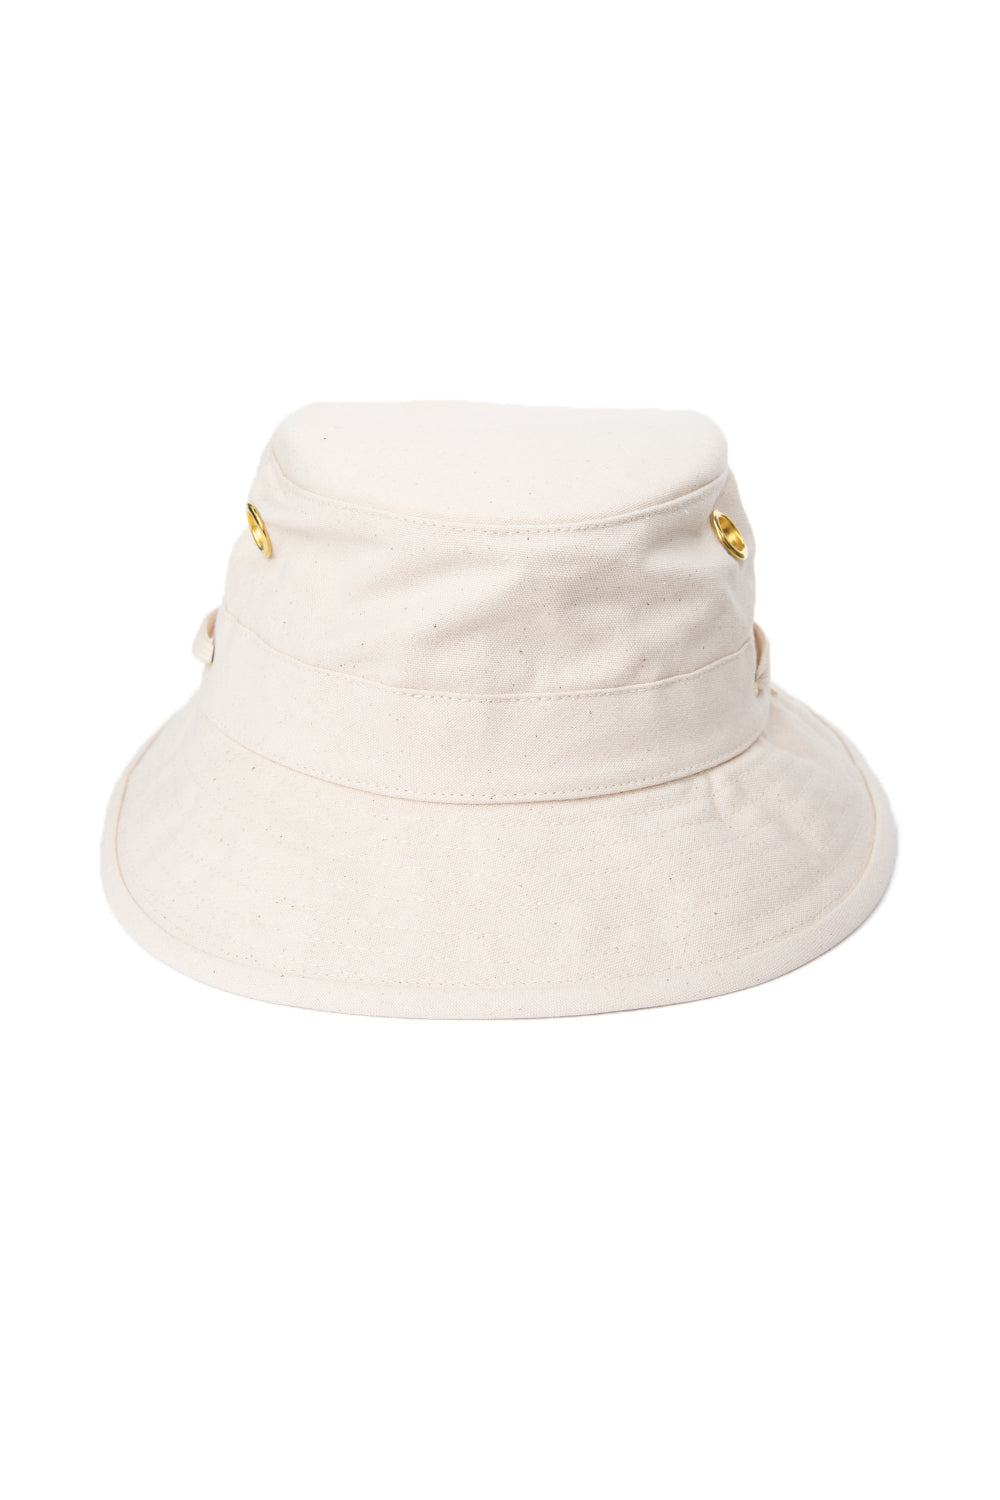 The Iconic T1 Bucket Hat Accessories Tilley   